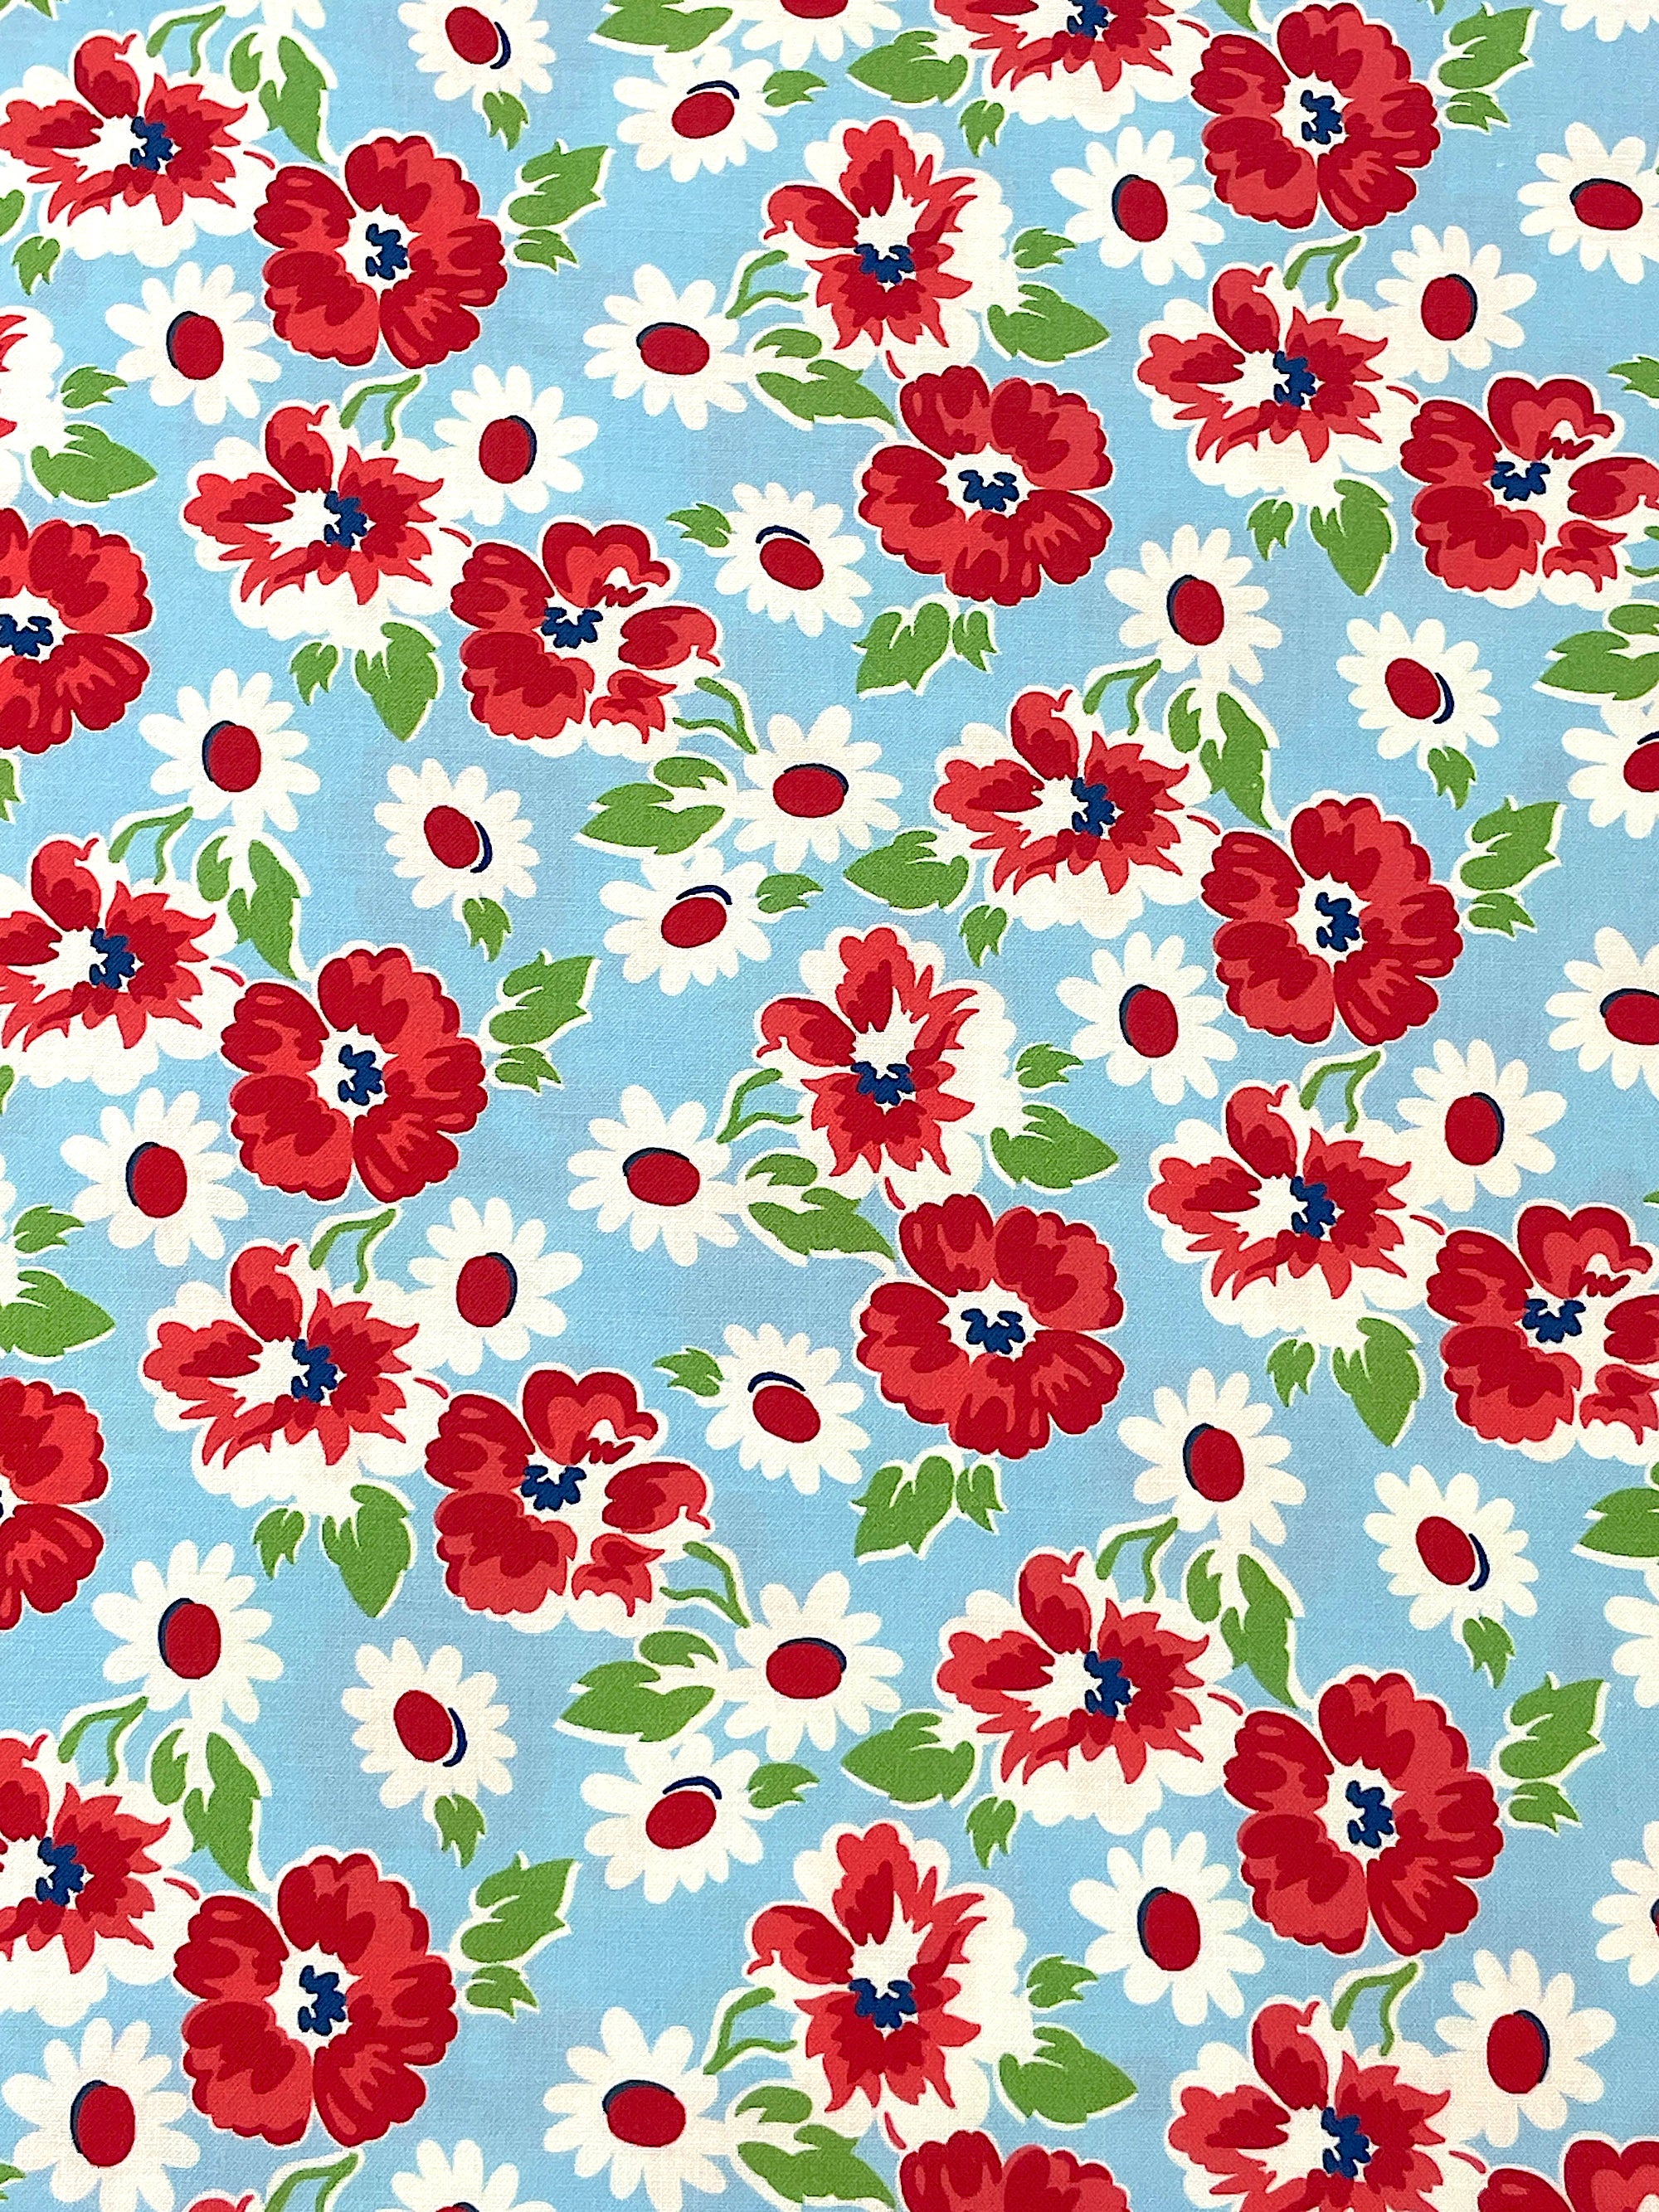 Blue cotton fabric covered with red and white flowers and green leaves.